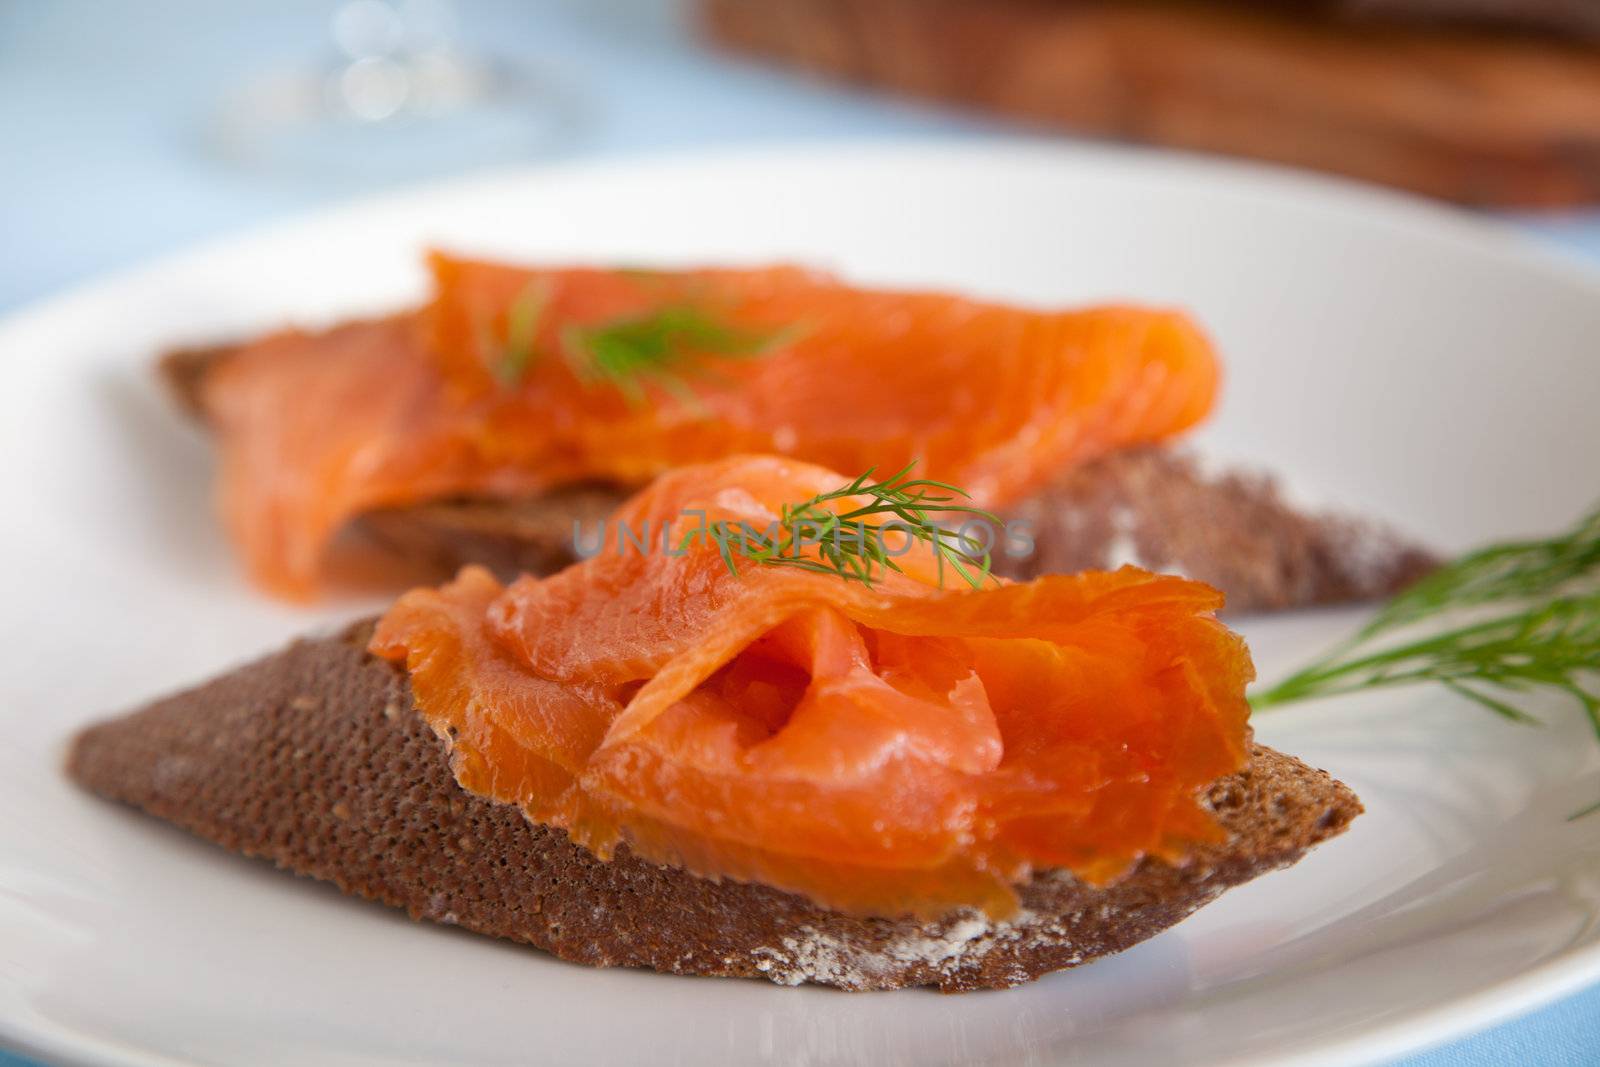 Smoked salmon with dille by Fotosmurf